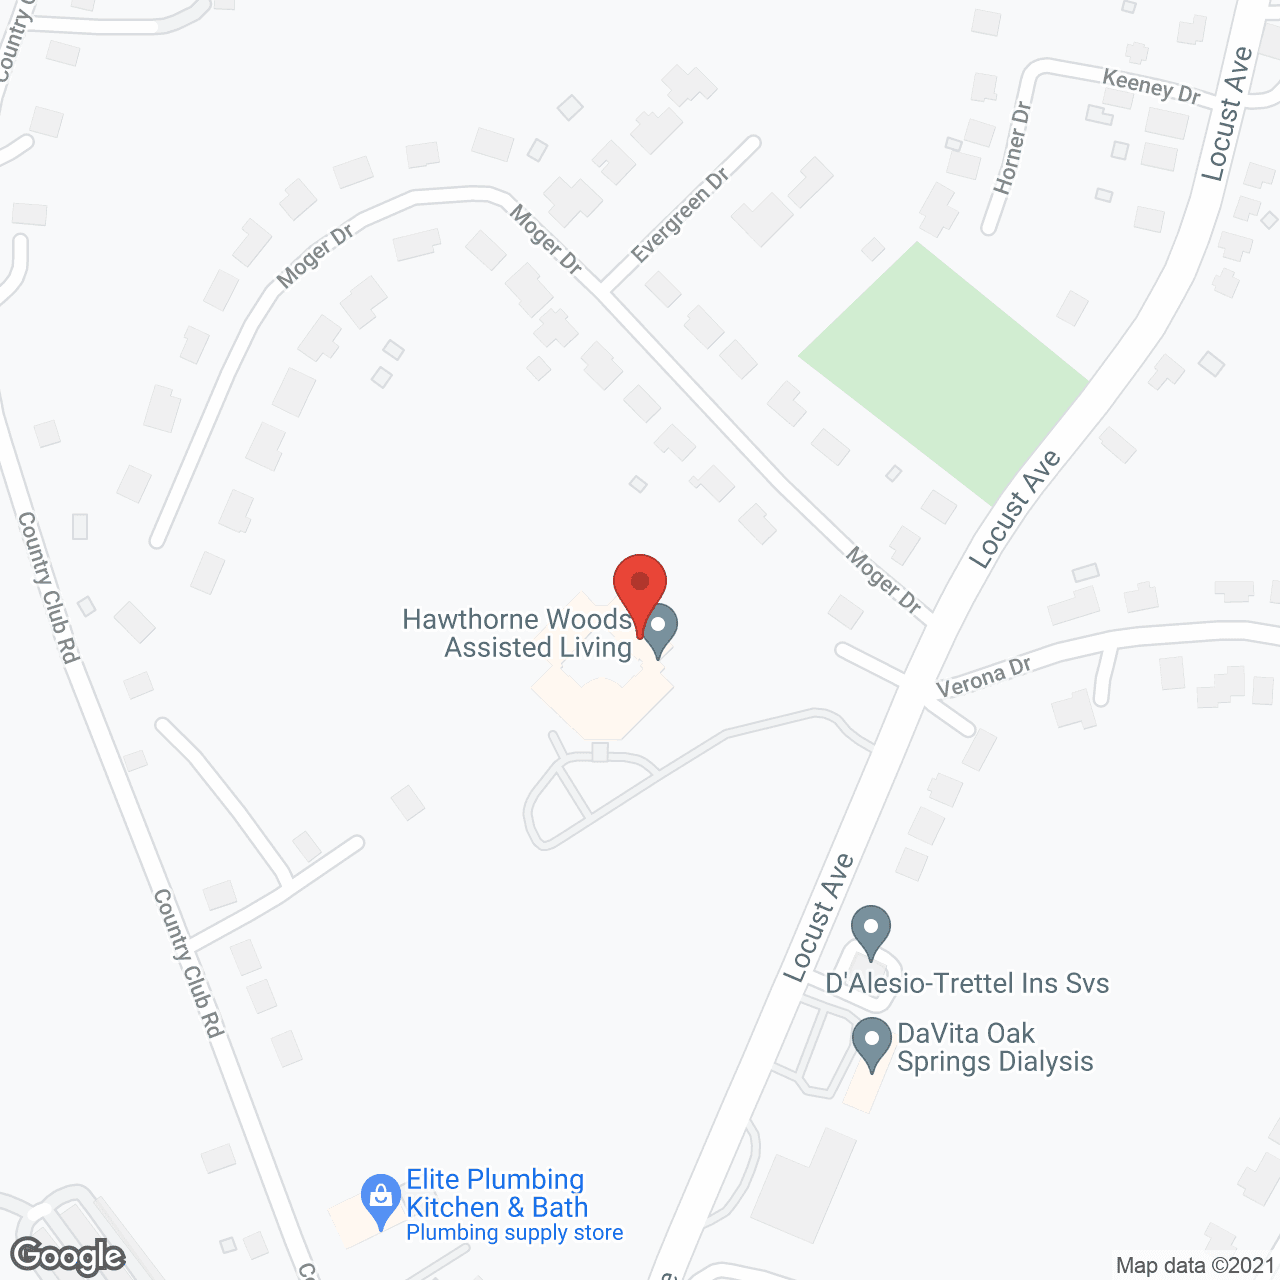 Hawthorne Woods Assisted Living in google map